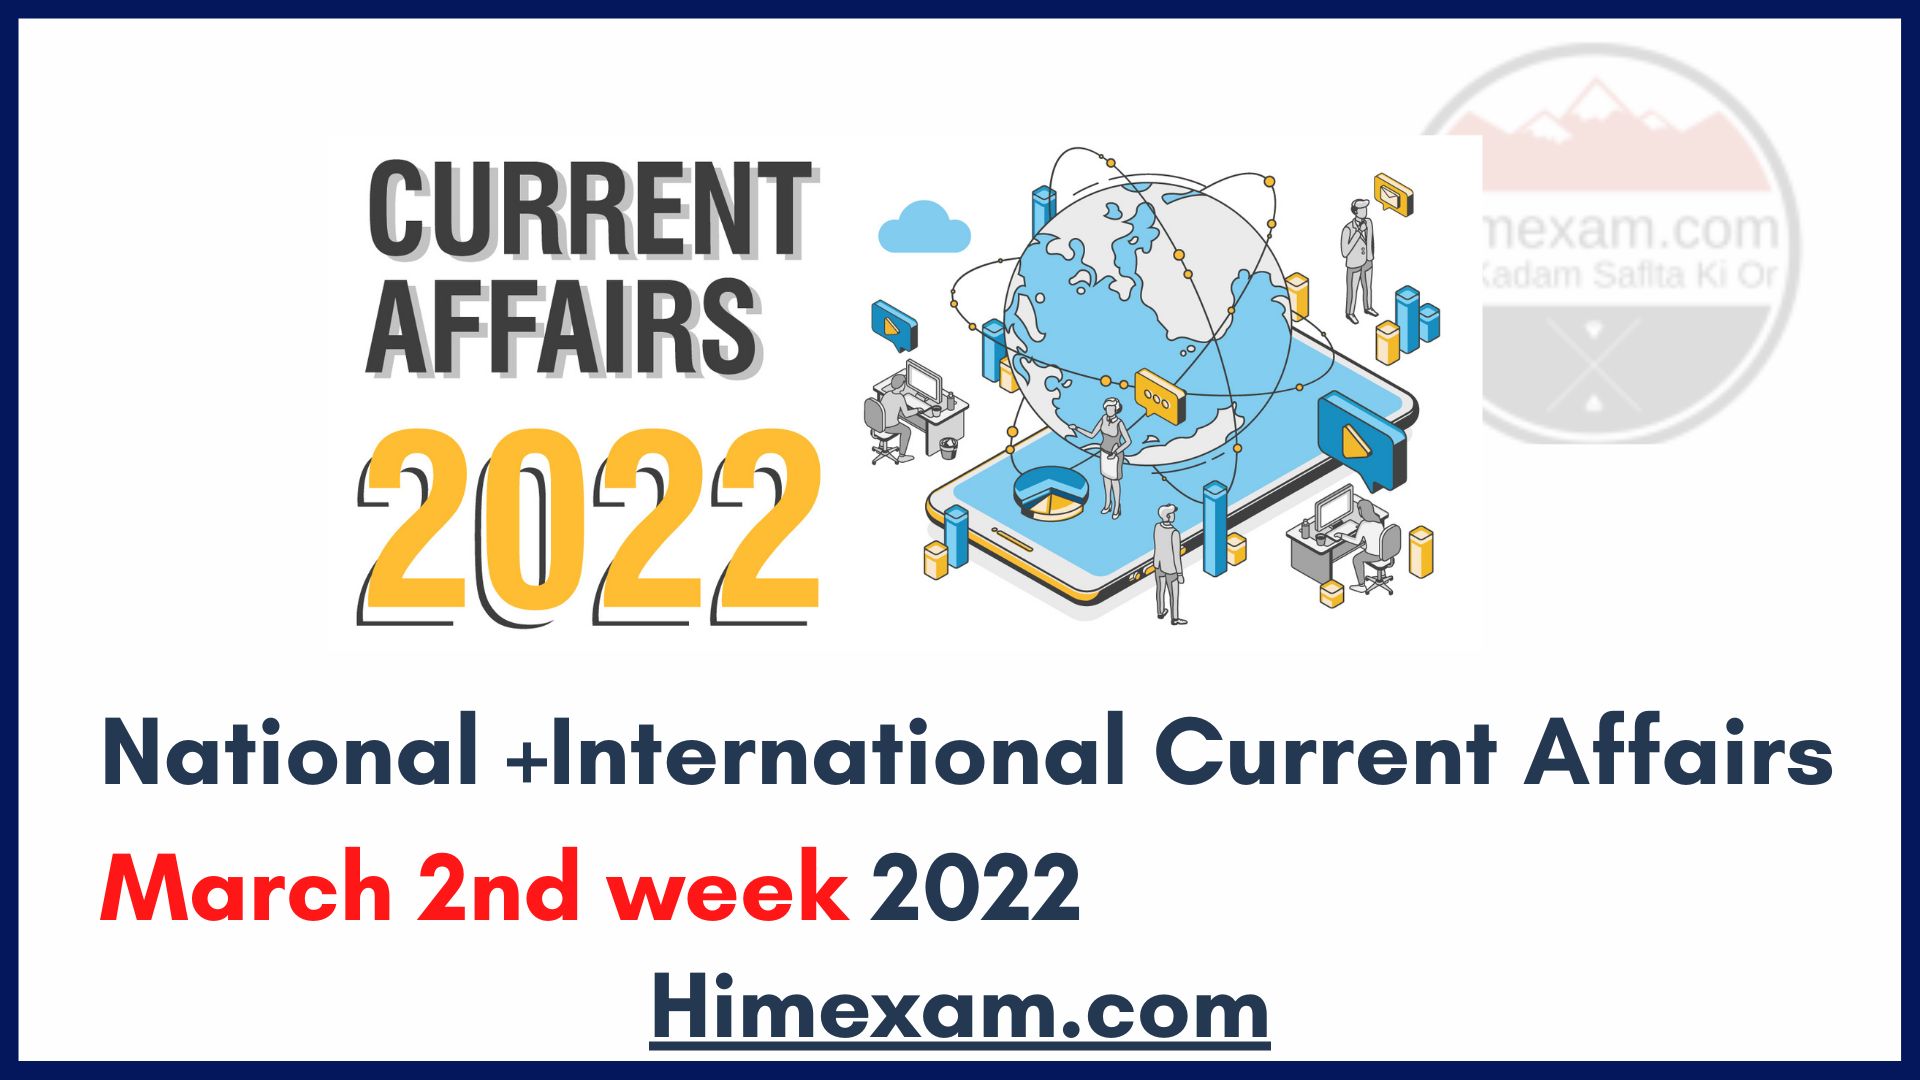 National +International Current Affairs March 2nd week 2022